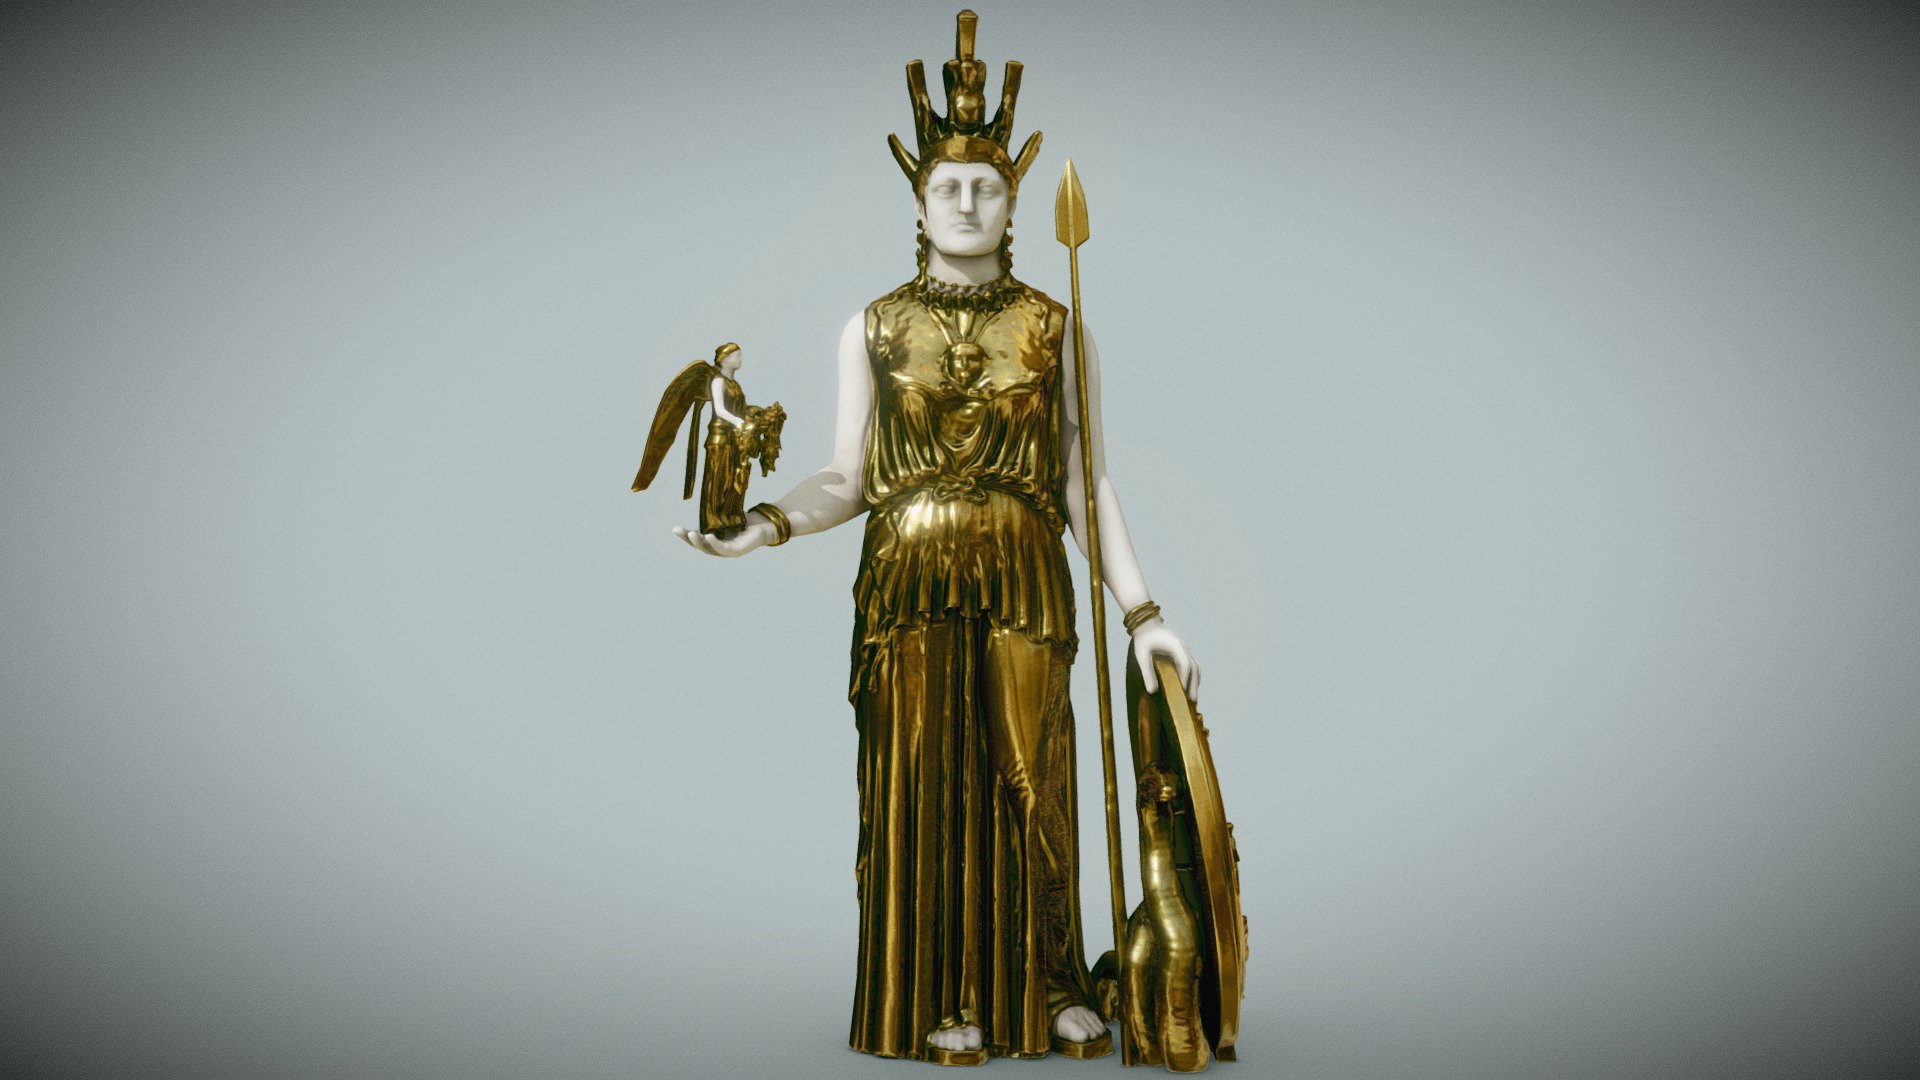 The statue of Athena Parthenos (Ancient Greek: Παρθένος Ἀθηνᾶ, lit. &lsquo;Athena the Virgin') was a monumental chryselephantine sculpture of the goddess Athena. Attributed to Phidias and dated to the mid-fifth century BCE, it was an offering from the city of Athens to Athena, its tutelary deity. The naos of the Parthenon on the acropolis of Athens was designed exclusively to accommodate it.

Clean up, retopo and retexture of this Athena statue scan by notdarrenho shared under CC-BY - Athena Parthenos - Buy Royalty Free 3D model by Mateusz Woliński (@jeandiz) 3d model